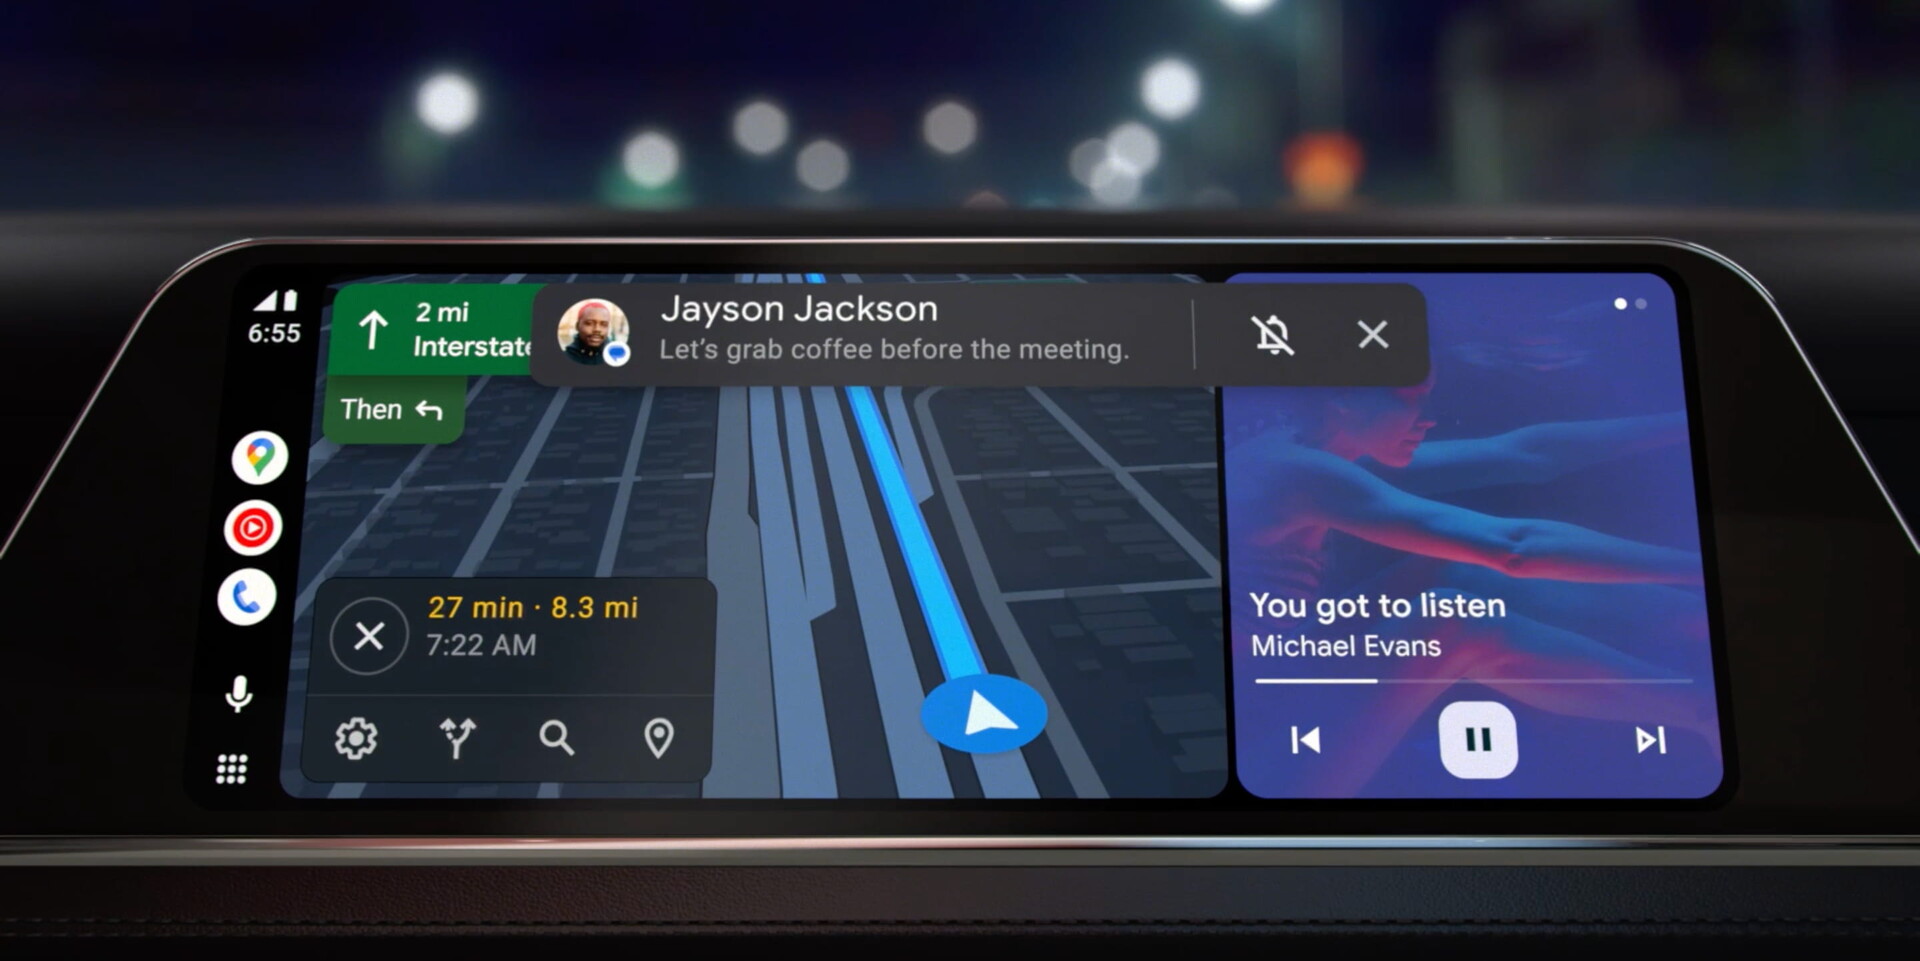 Exploring Android Auto 10.7: What's New and How to Update